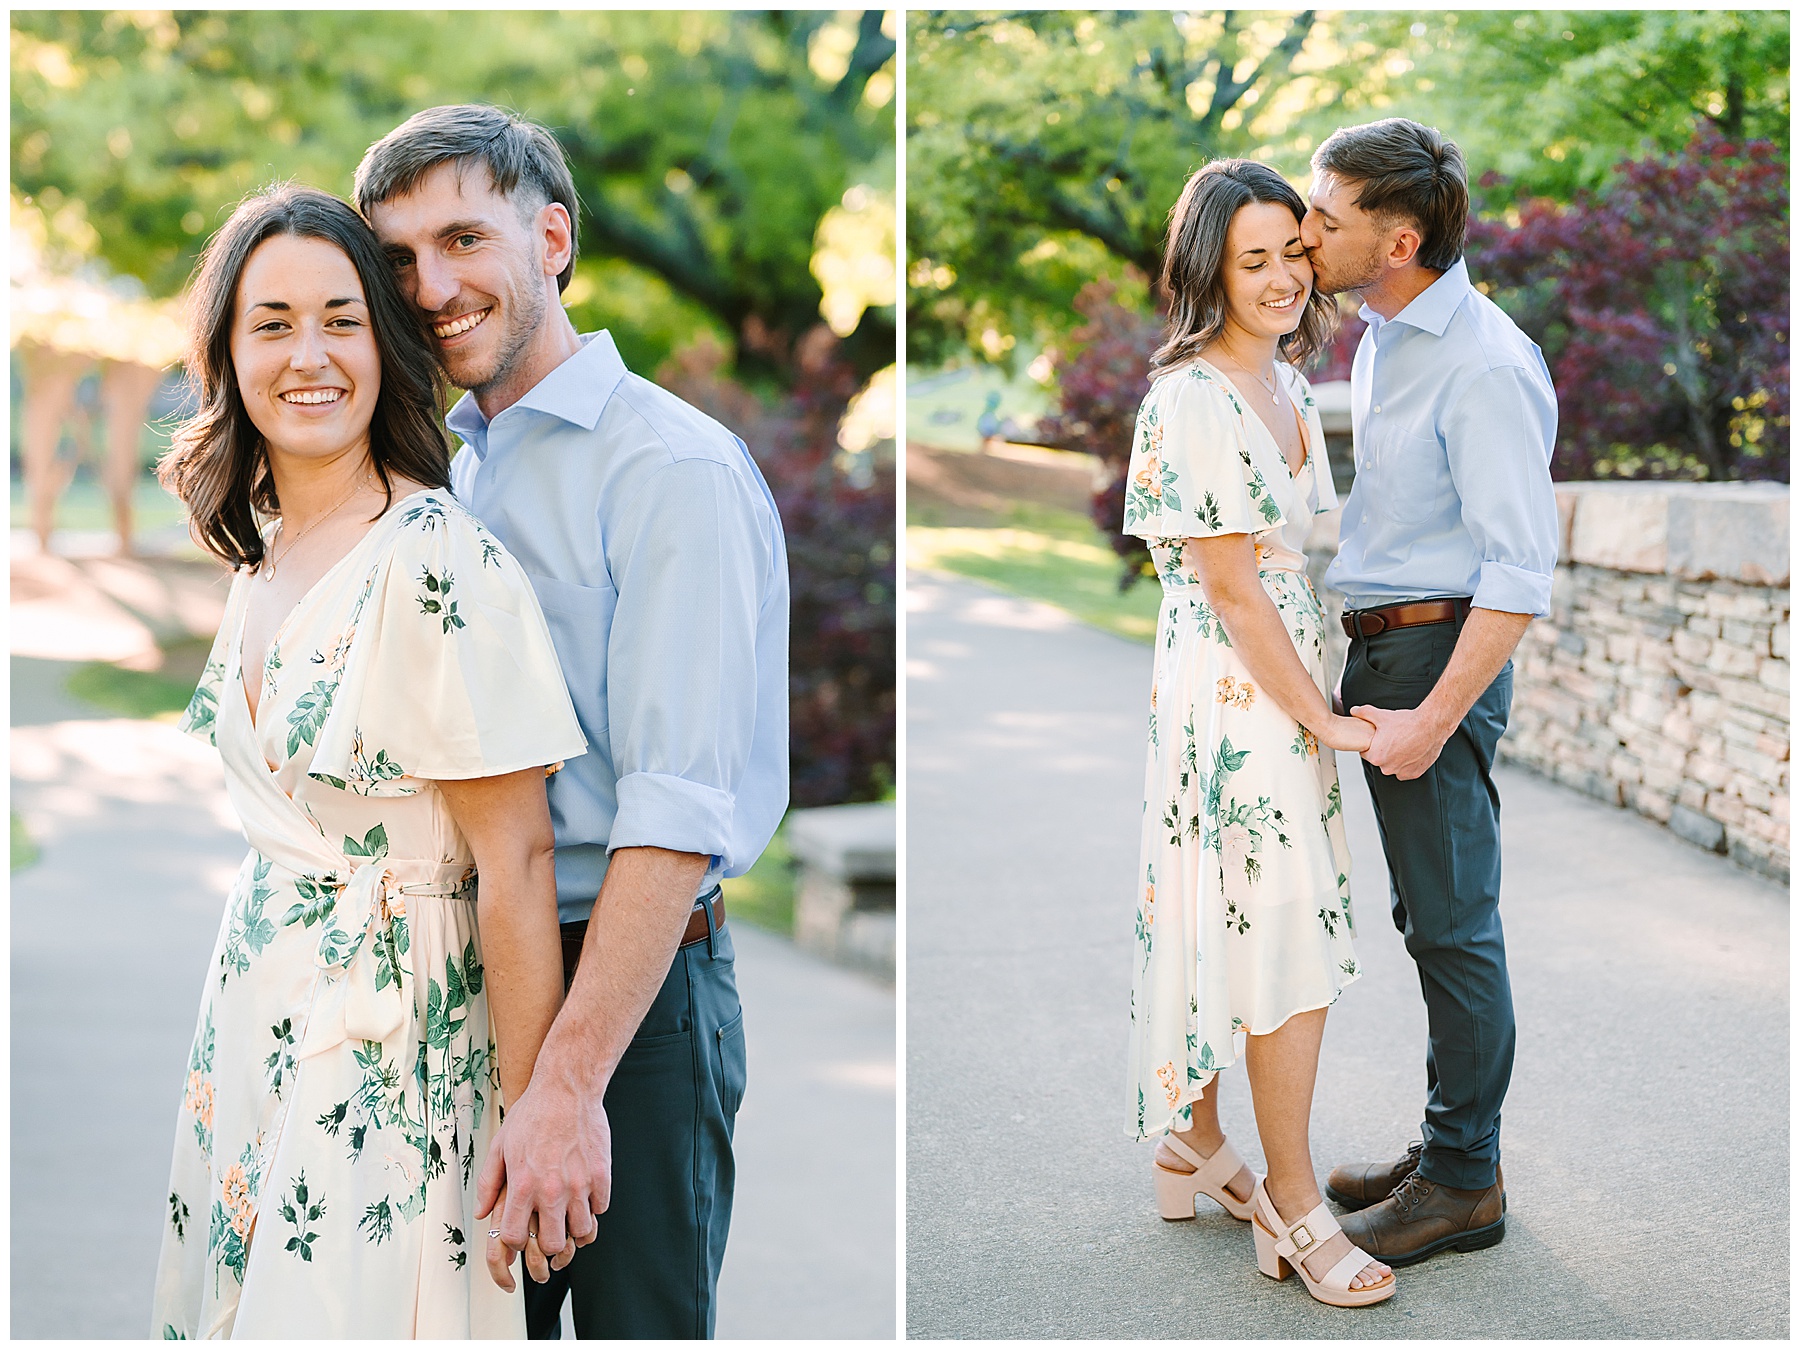 locations for your engagement photos in charlotte.jpg